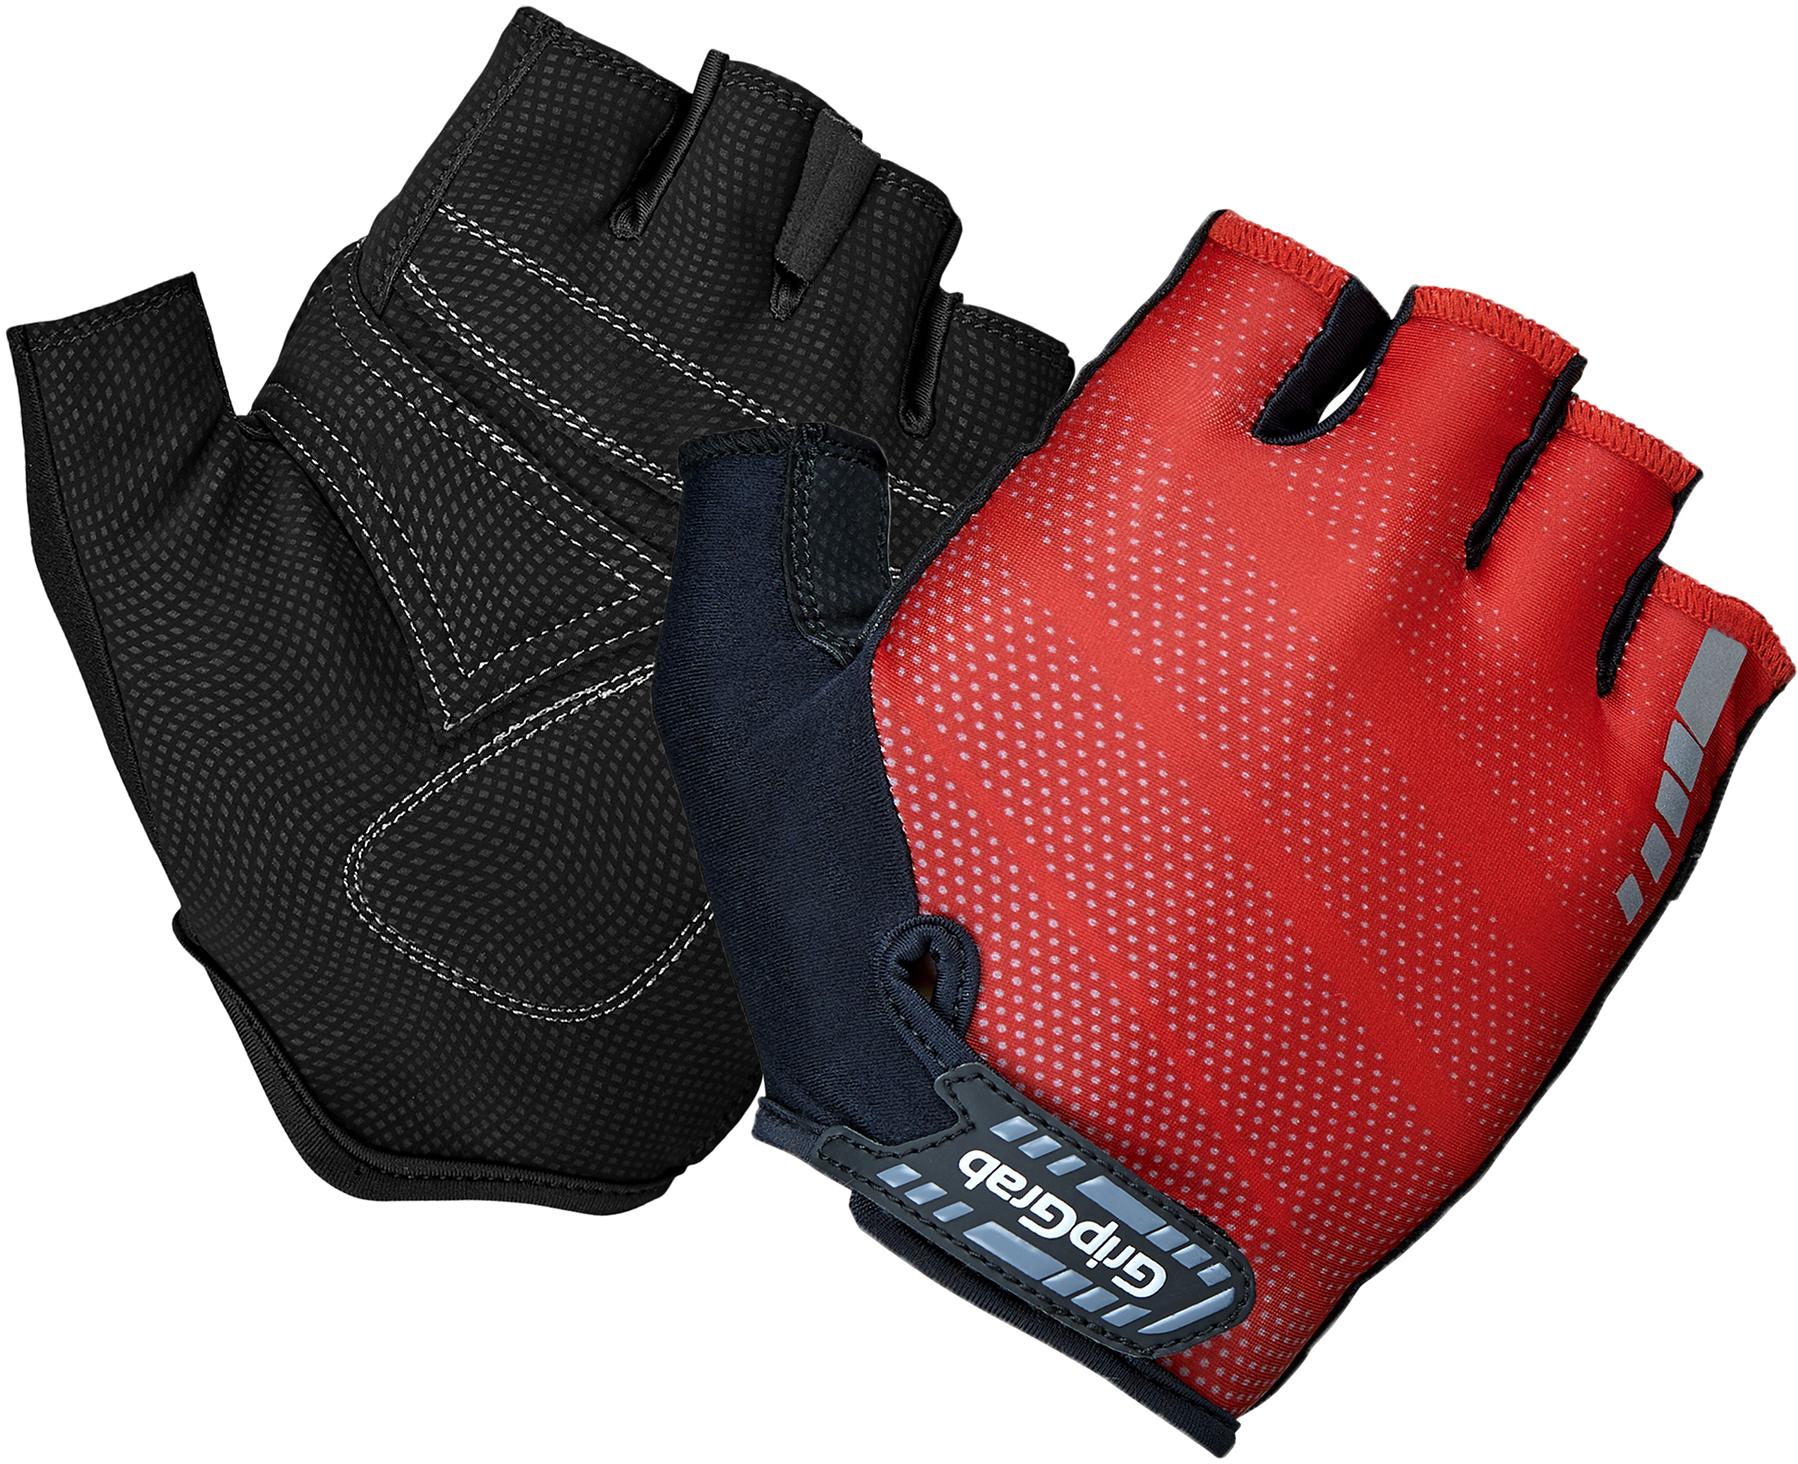 Gripgrab Rouleur Padded Glove  Red